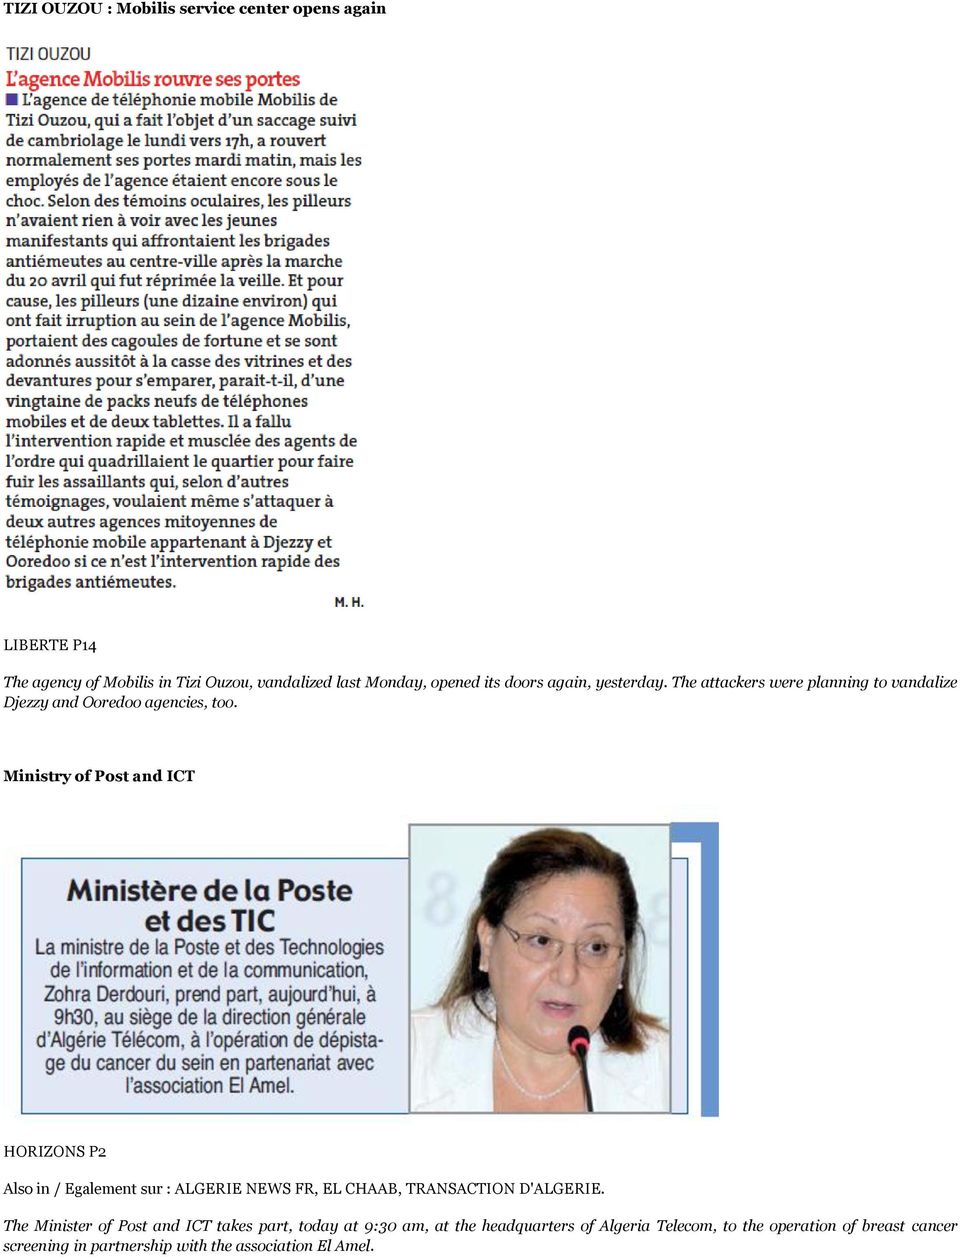 Ministry of Post and ICT HORIZONS P2 Also in / Egalement sur : ALGERIE NEWS FR, EL CHAAB, TRANSACTION D'ALGERIE.